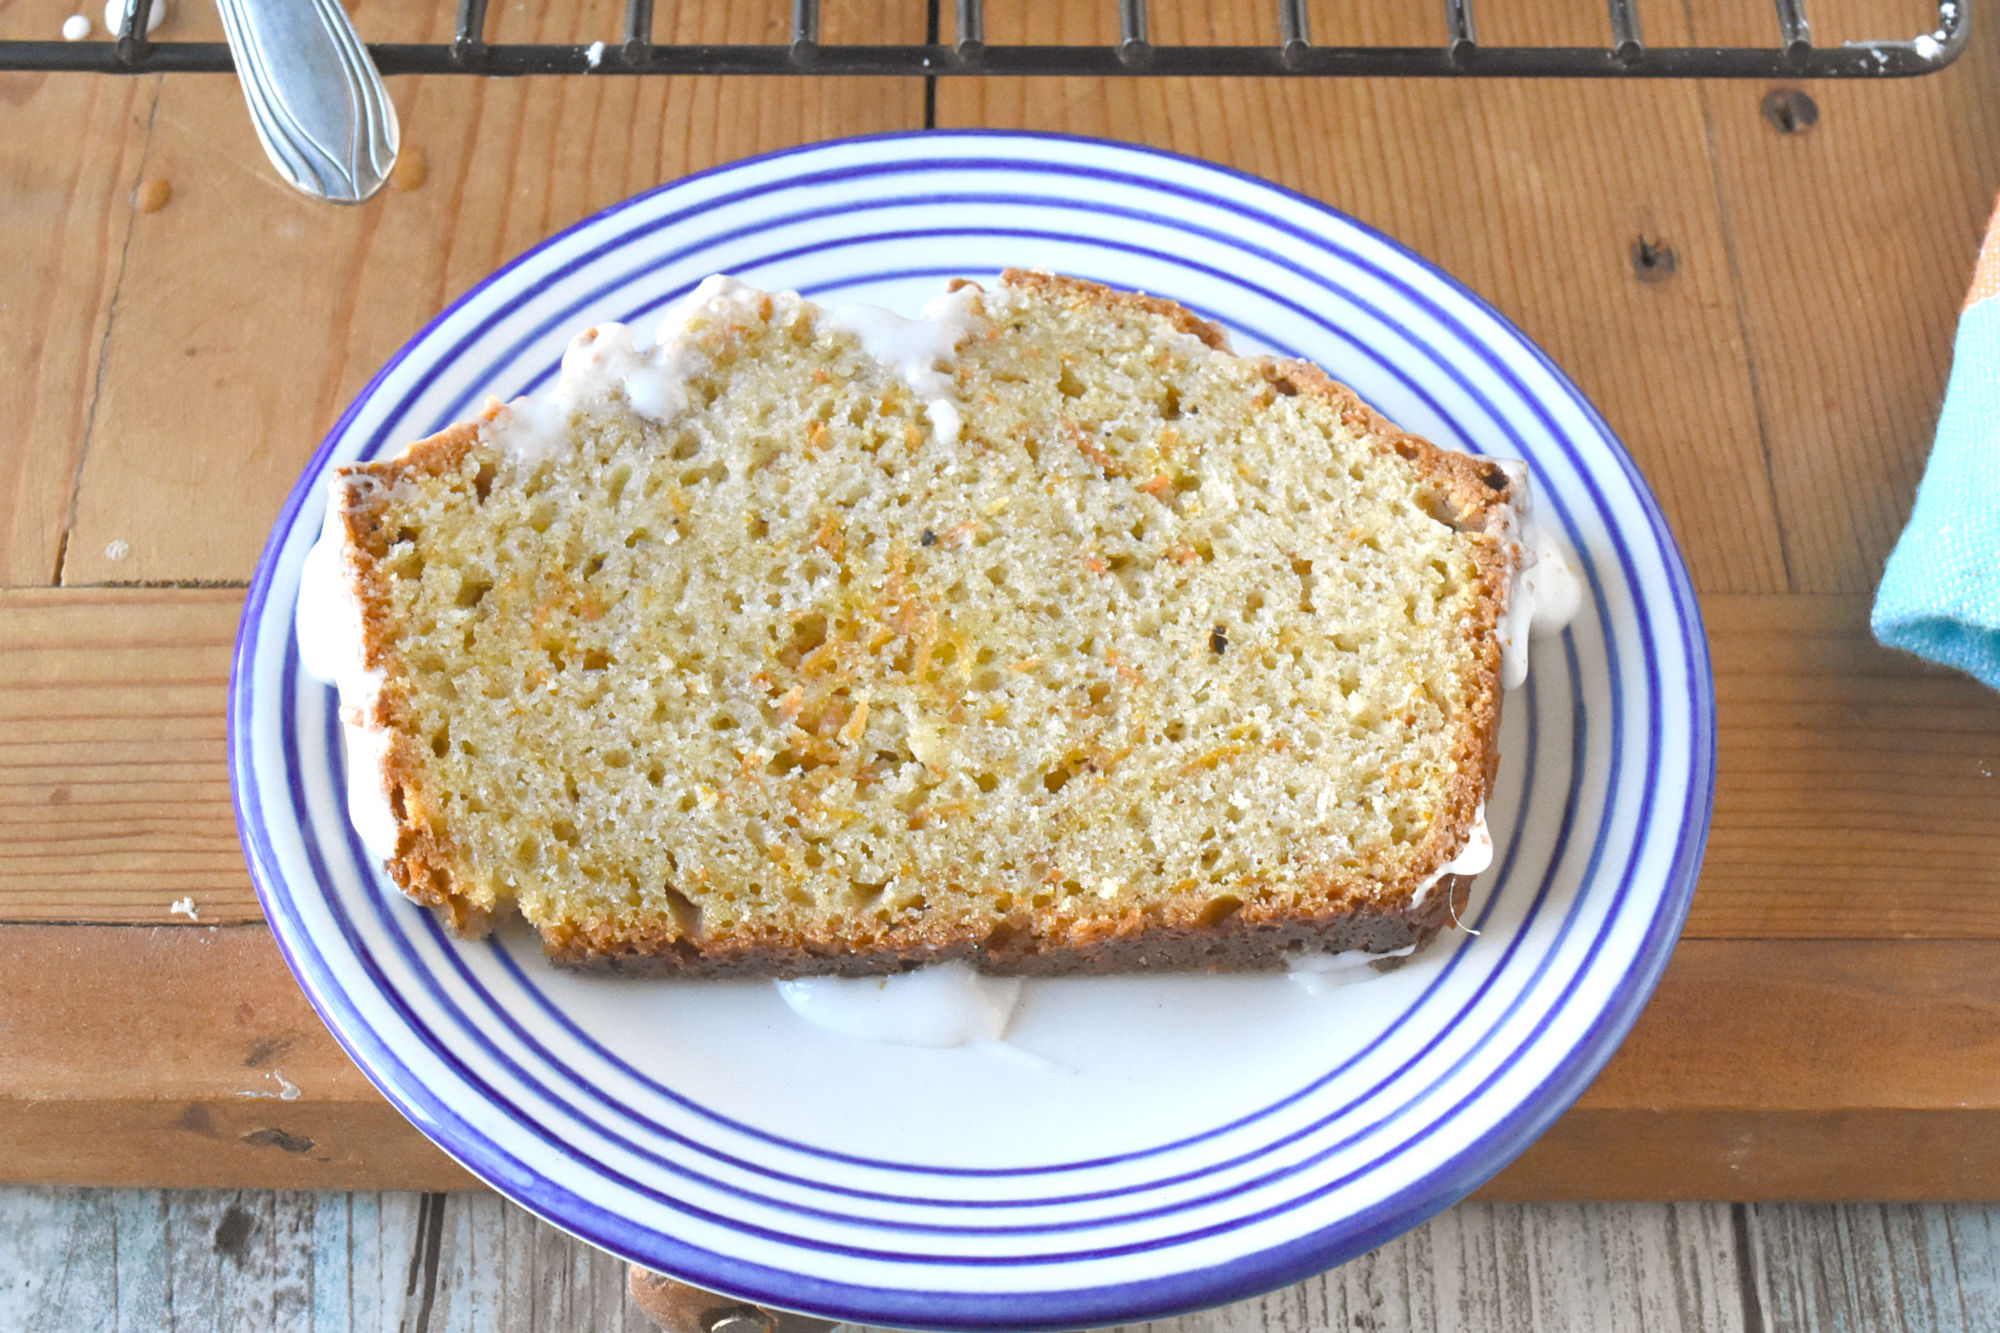 Carrot Cake Loaf has all the flavors of carrot cake in a quick bread loaf. It’s moist, full of spices, and super easy to make. #OurFamilyTable